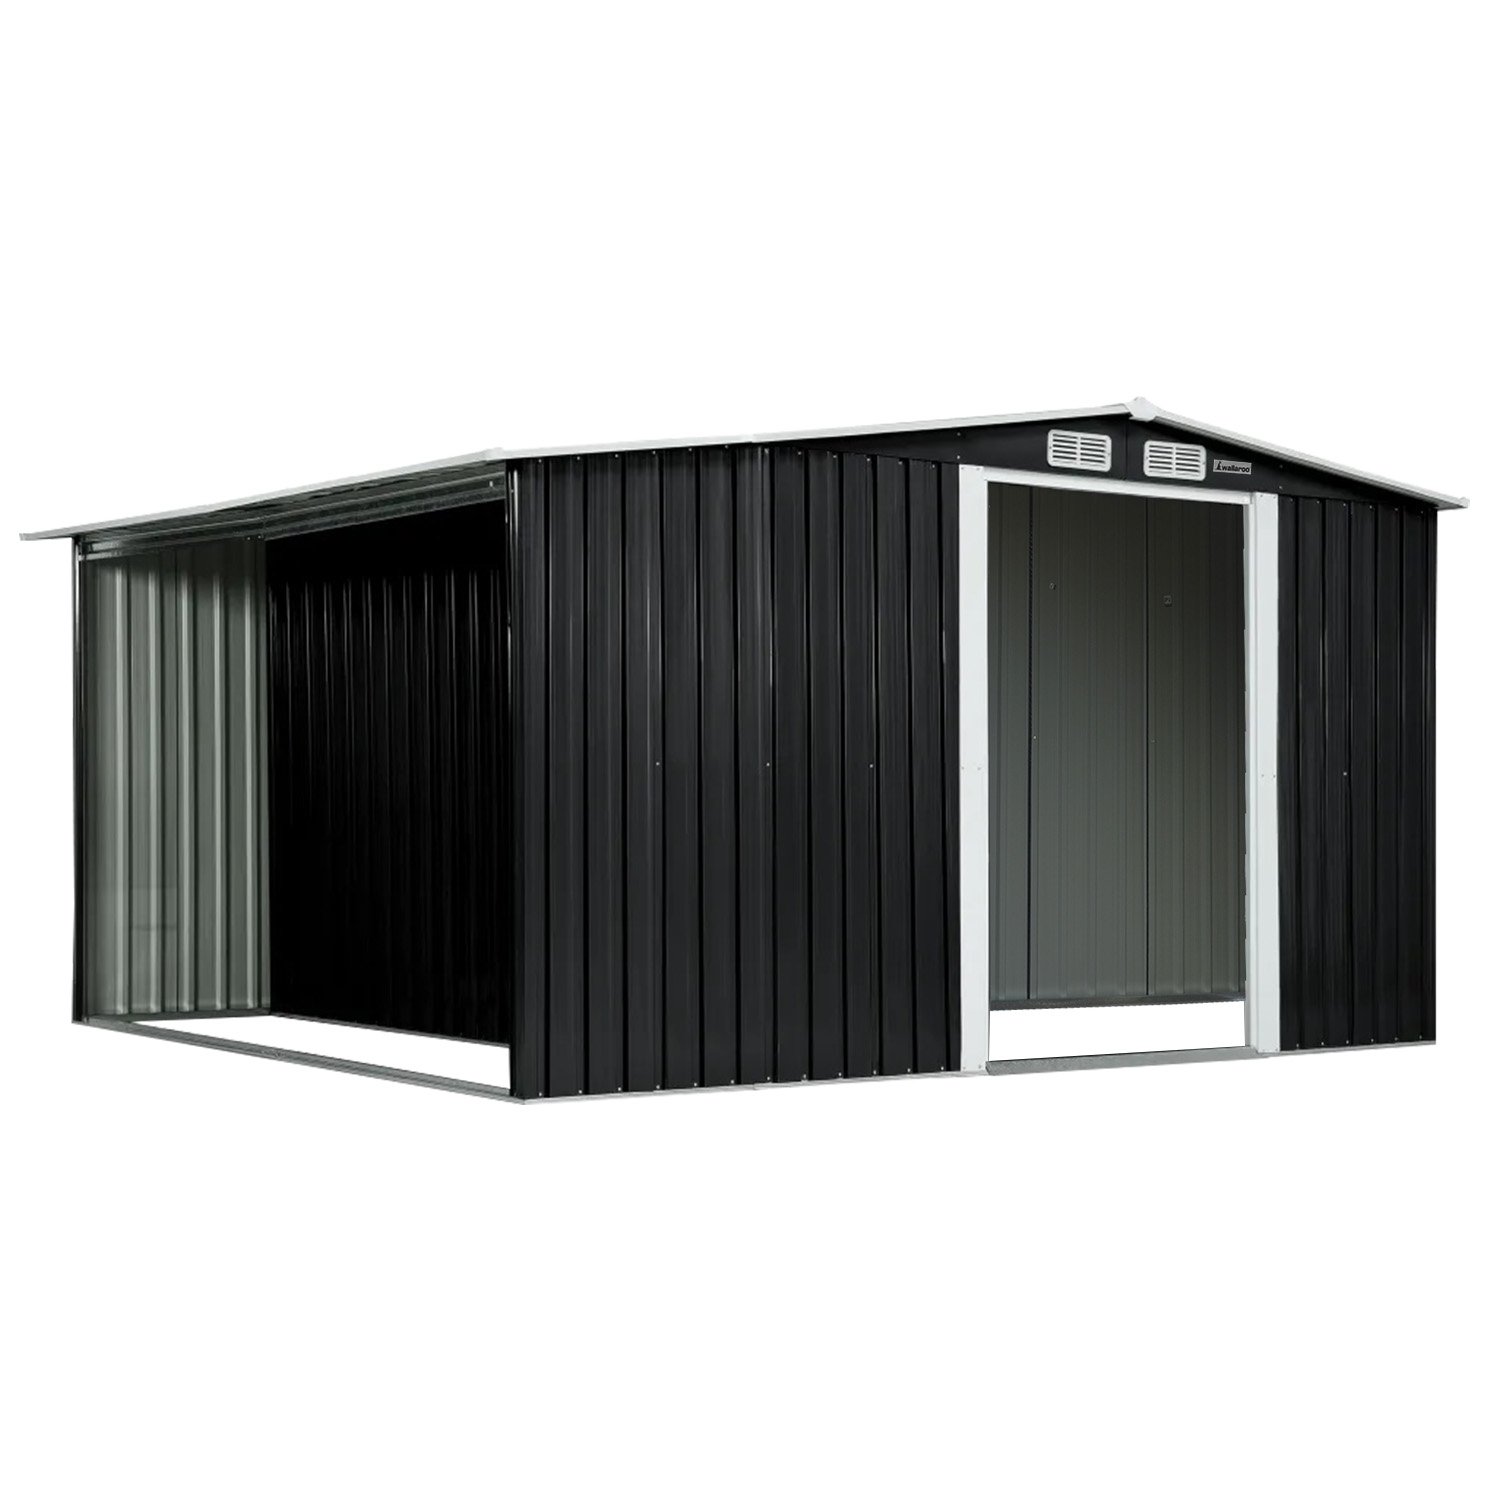 Wallaroo Garden Shed with Semi-Closed Storage 8*8FT - Black 2